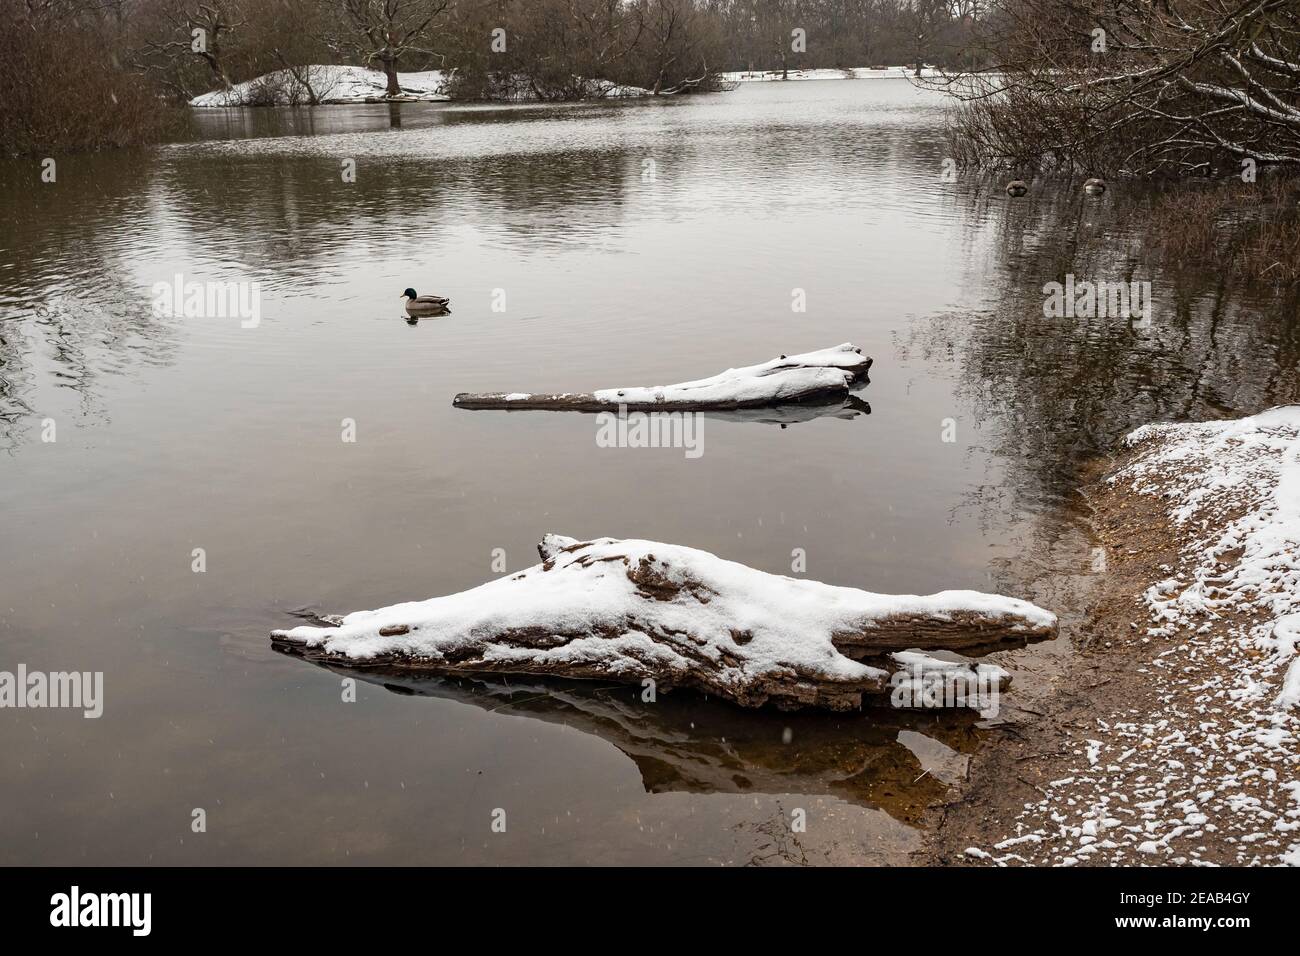 Snowy trunks in a pond landscape in Hollow Pond, Leytonstone, London, UK. Stock Photo